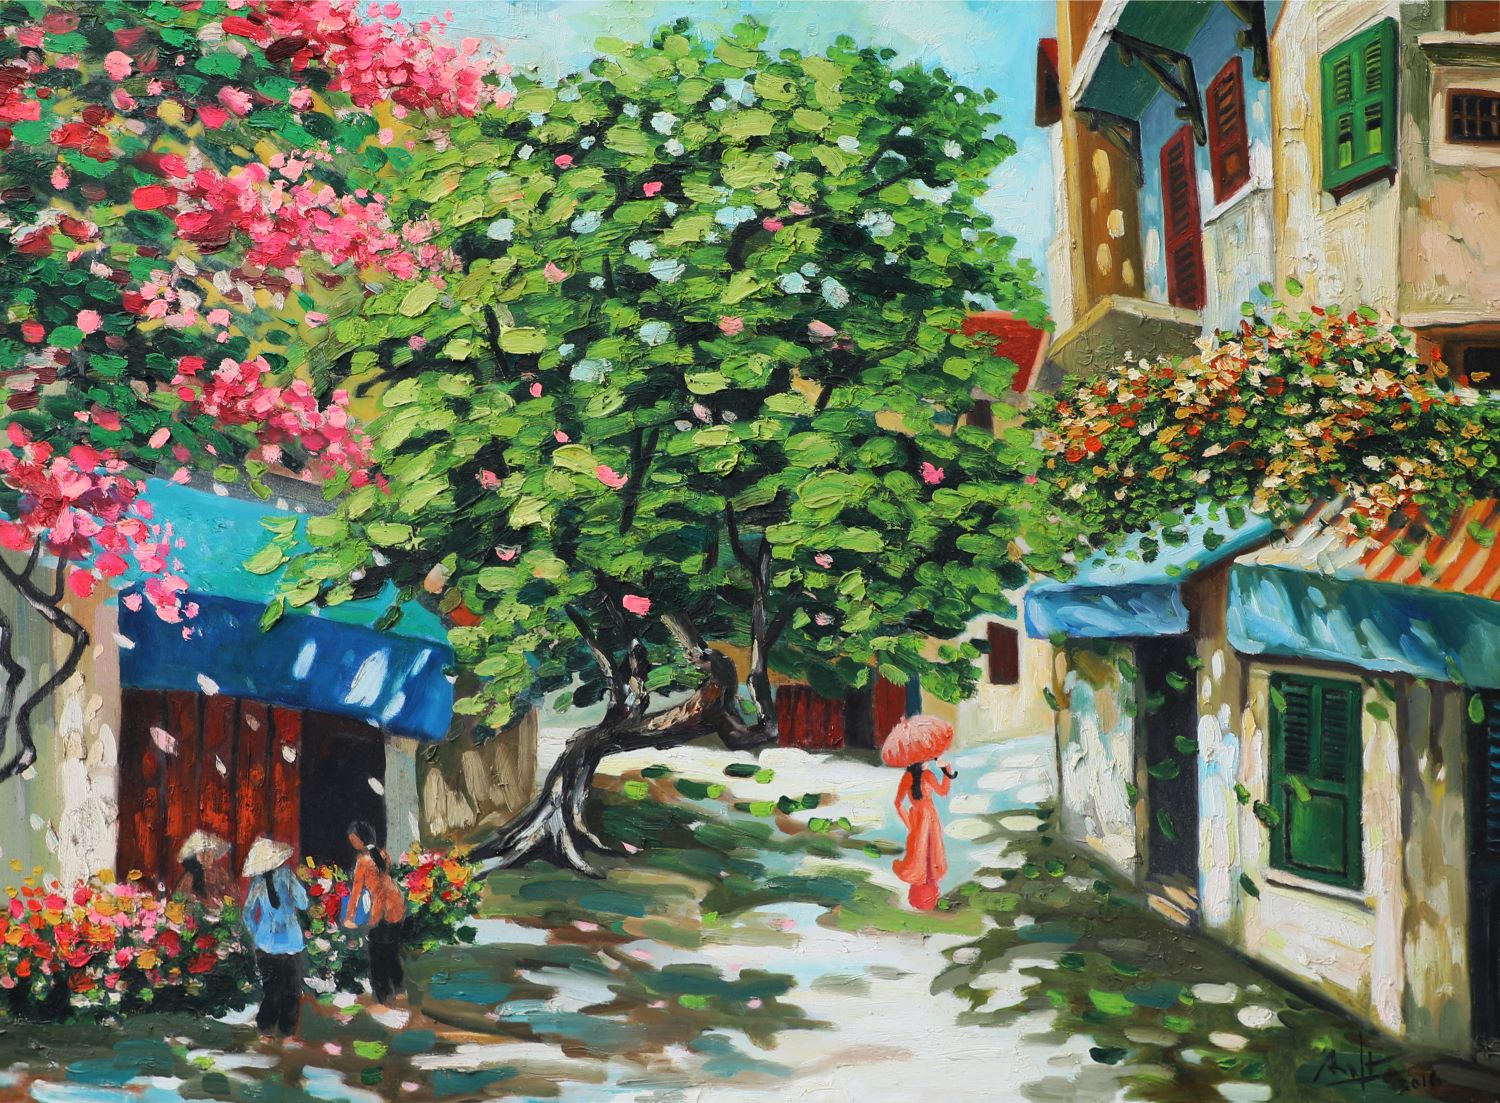 Old Street in the Summer II - Vietnamese Oil Painting by Artist Dau Quang Anh